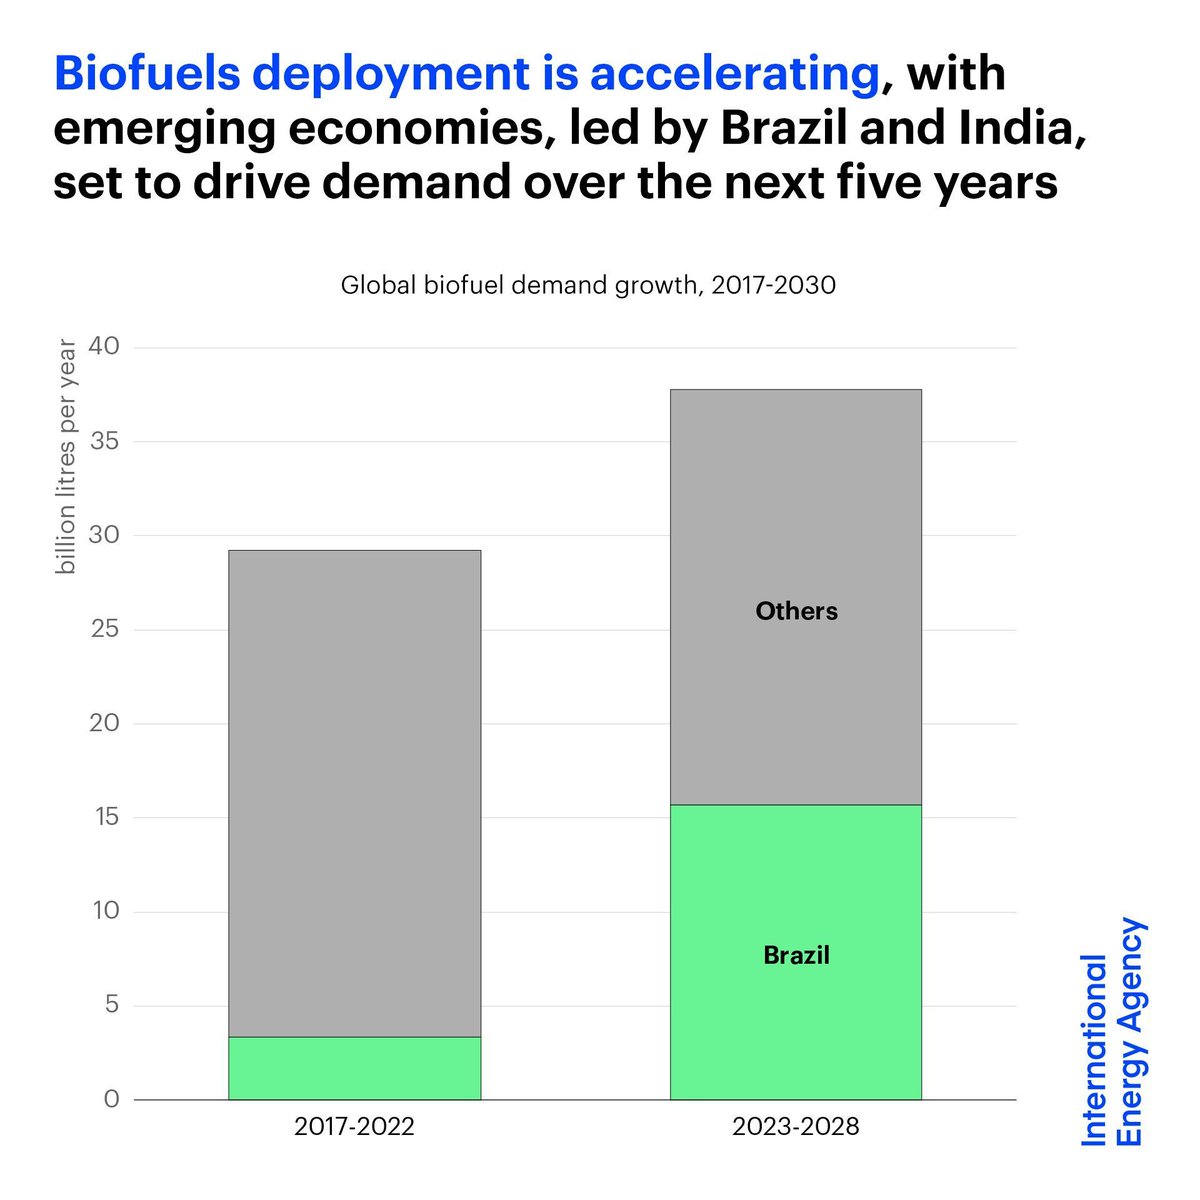 Emerging economies, led by Brazil & India, are expected to drive 70% of global biofuel demand over the next 5 years While biofuels deployment is accelerating, much stronger growth will be key to align with a net zero pathway More in Renewables 2023 👉 iea.li/3TD5Fgi